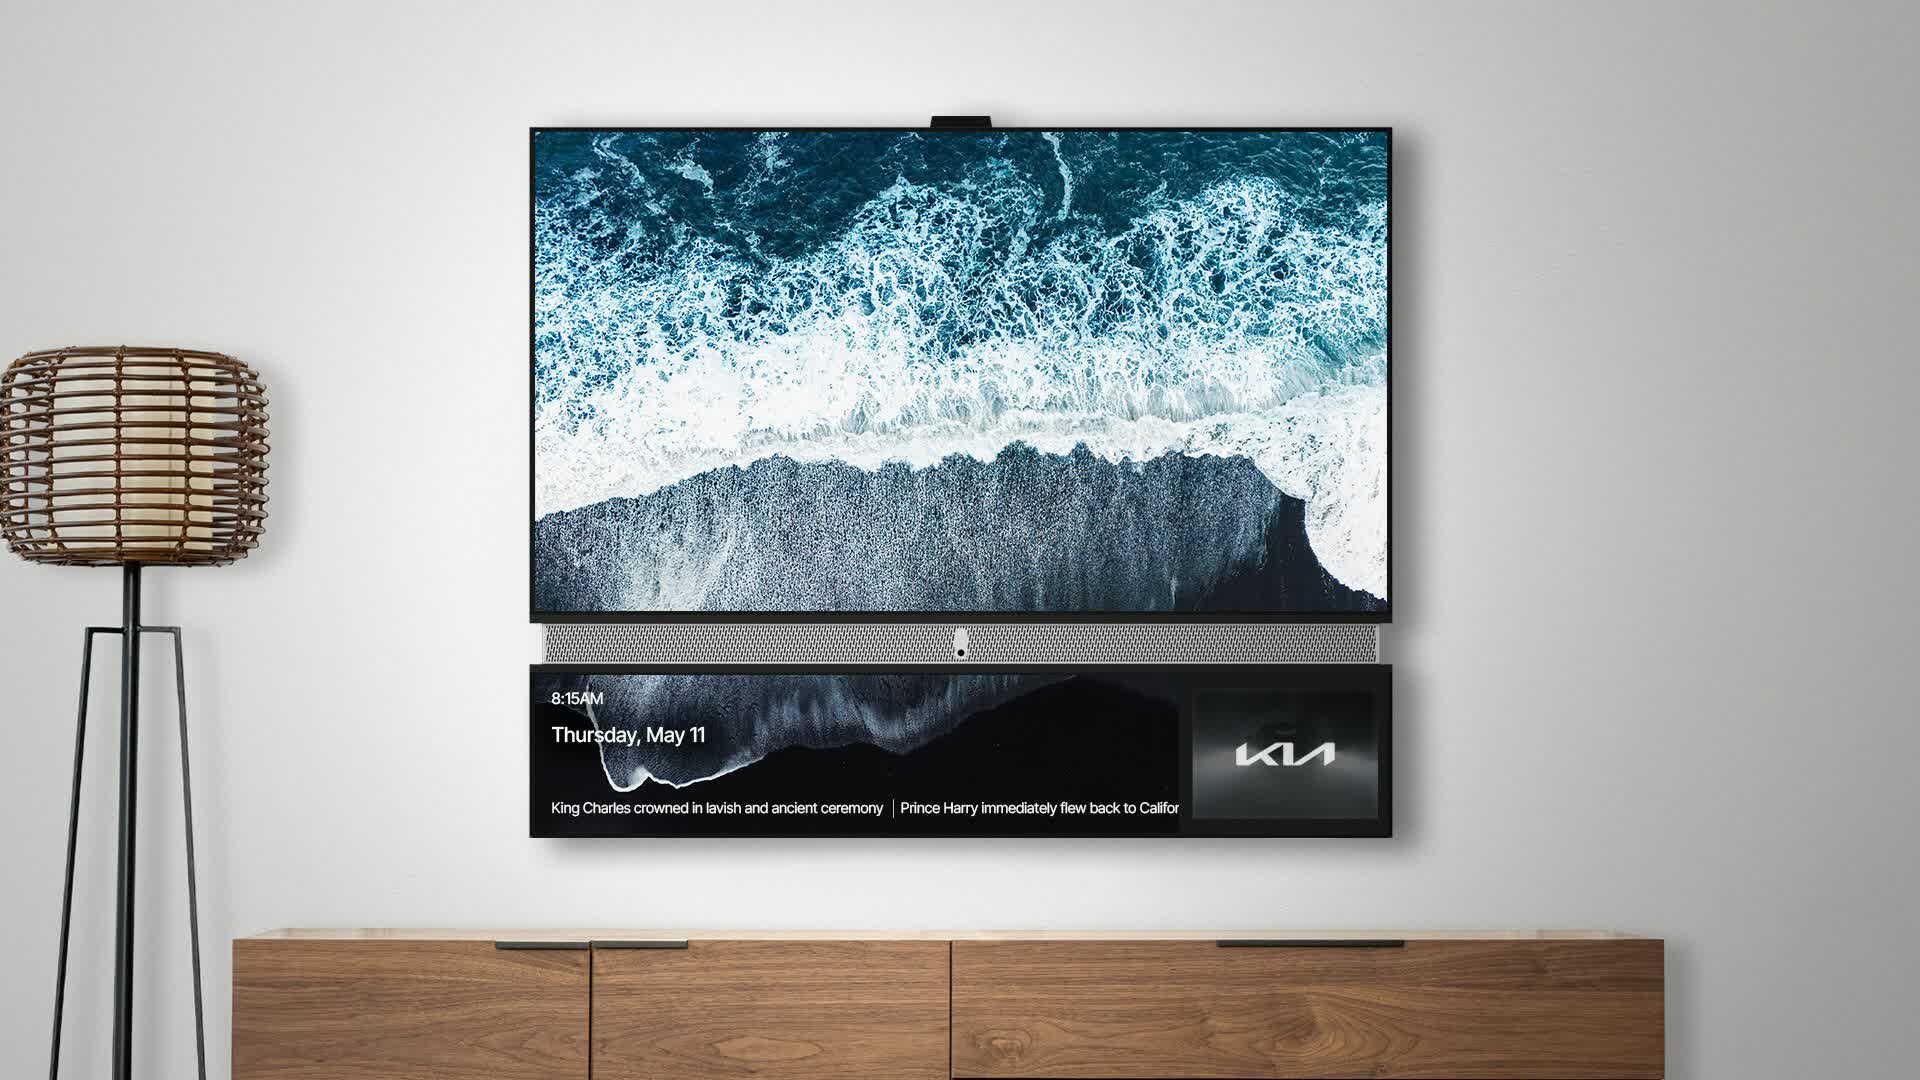 Those free 55-inch 4K TVs that show nonstop ads on a second screen are now shipping